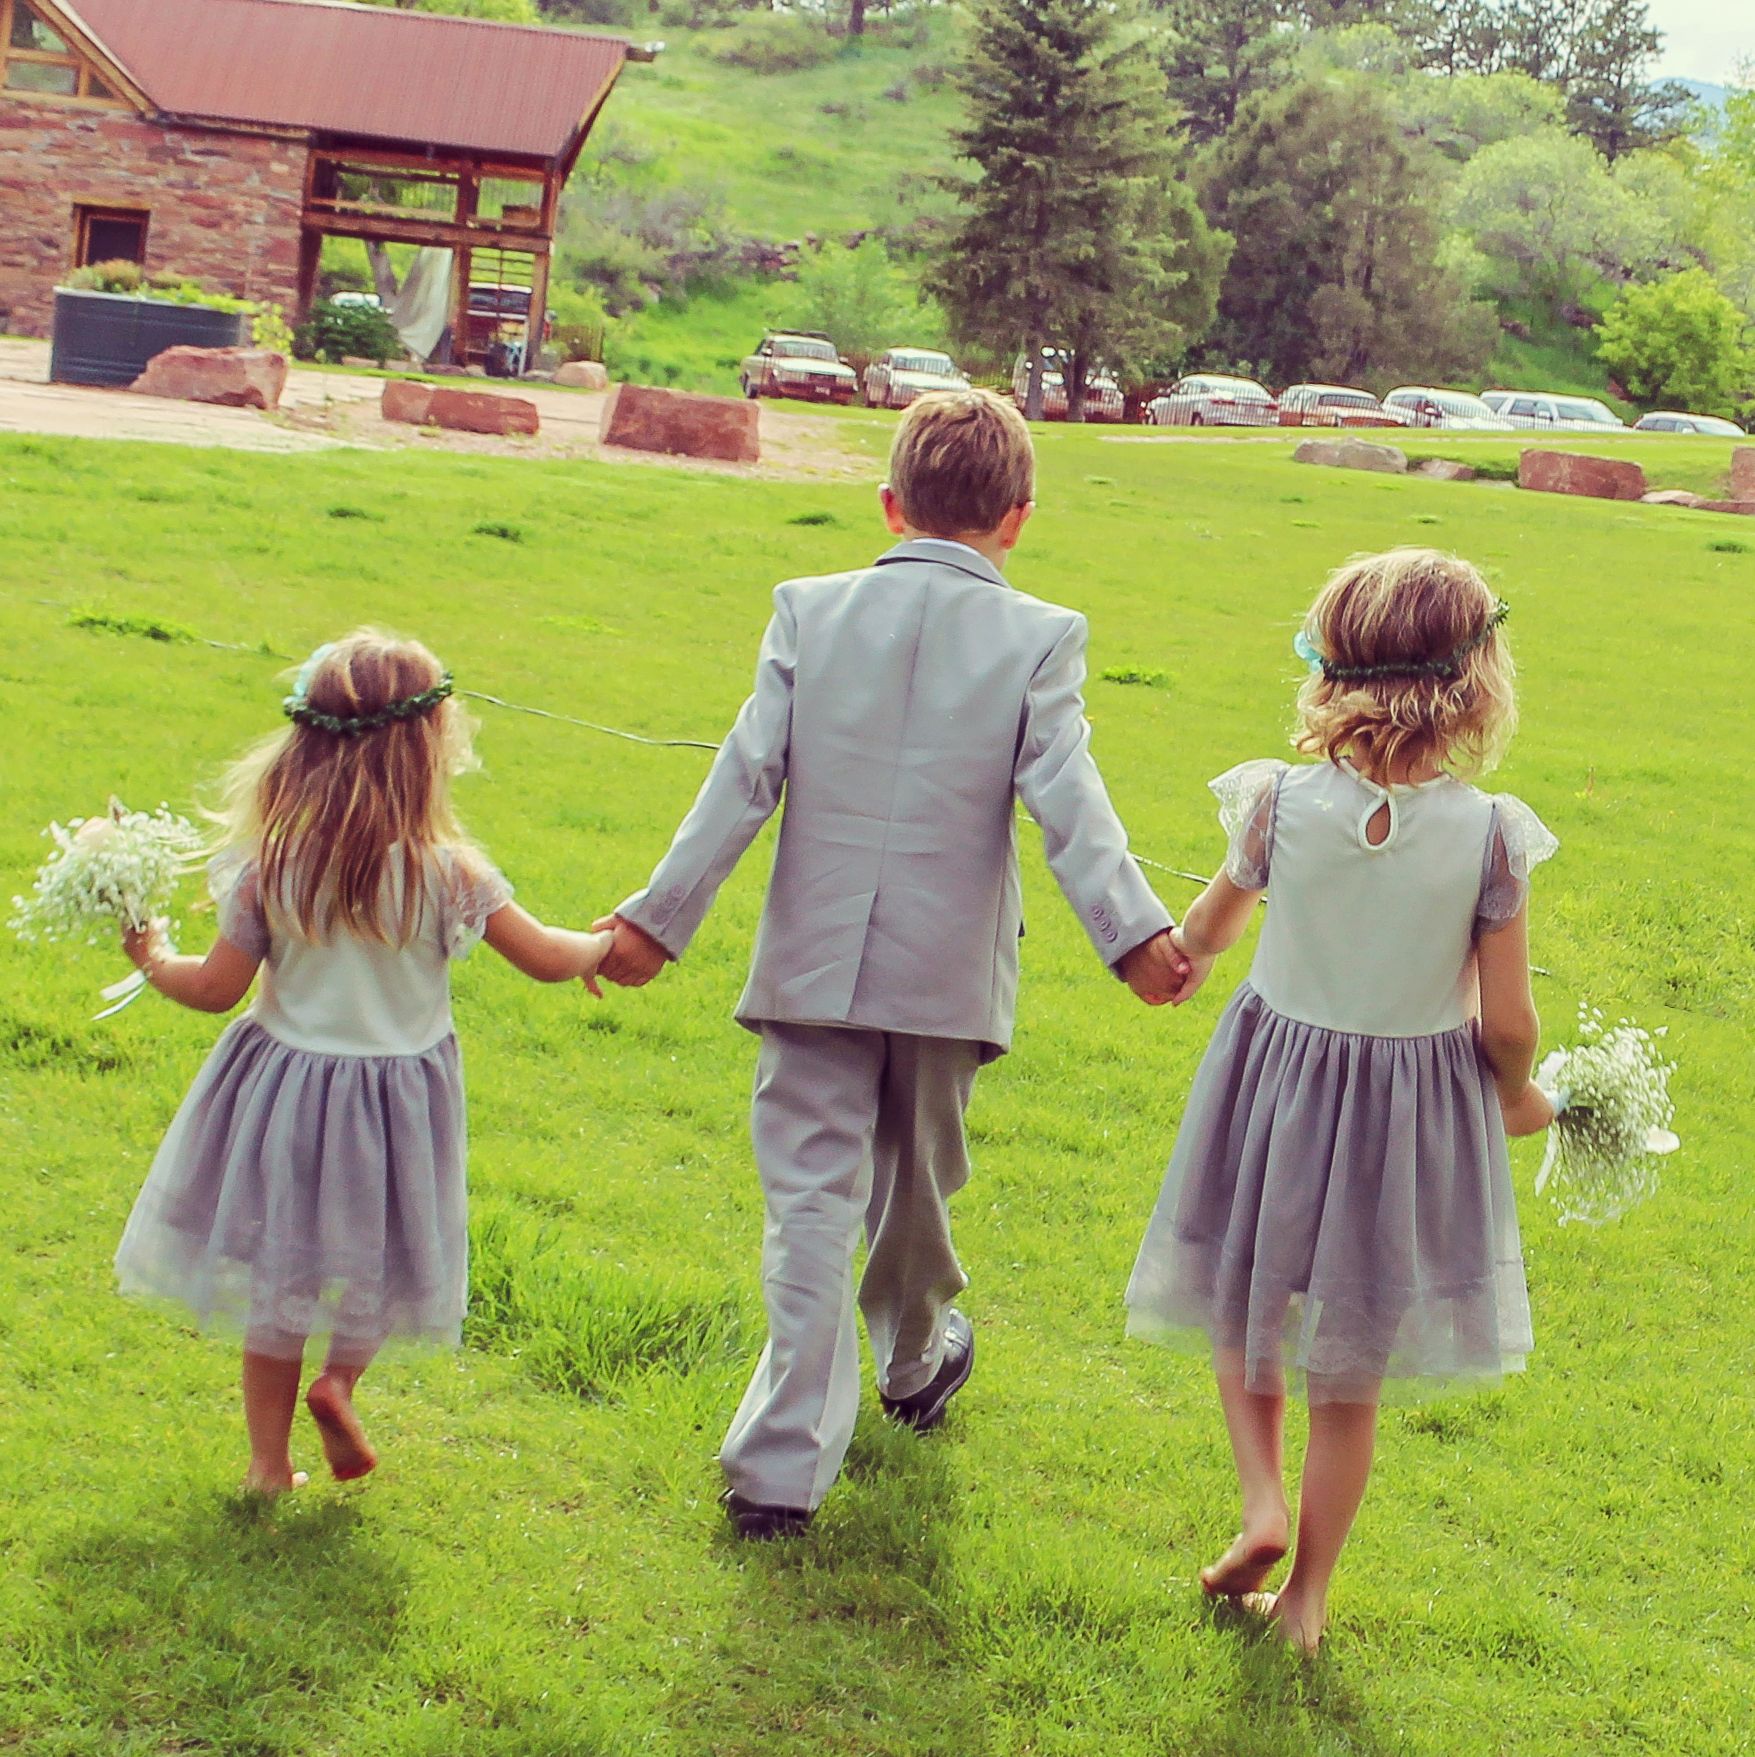 Is It Rude To Have A Child-Free Wedding?